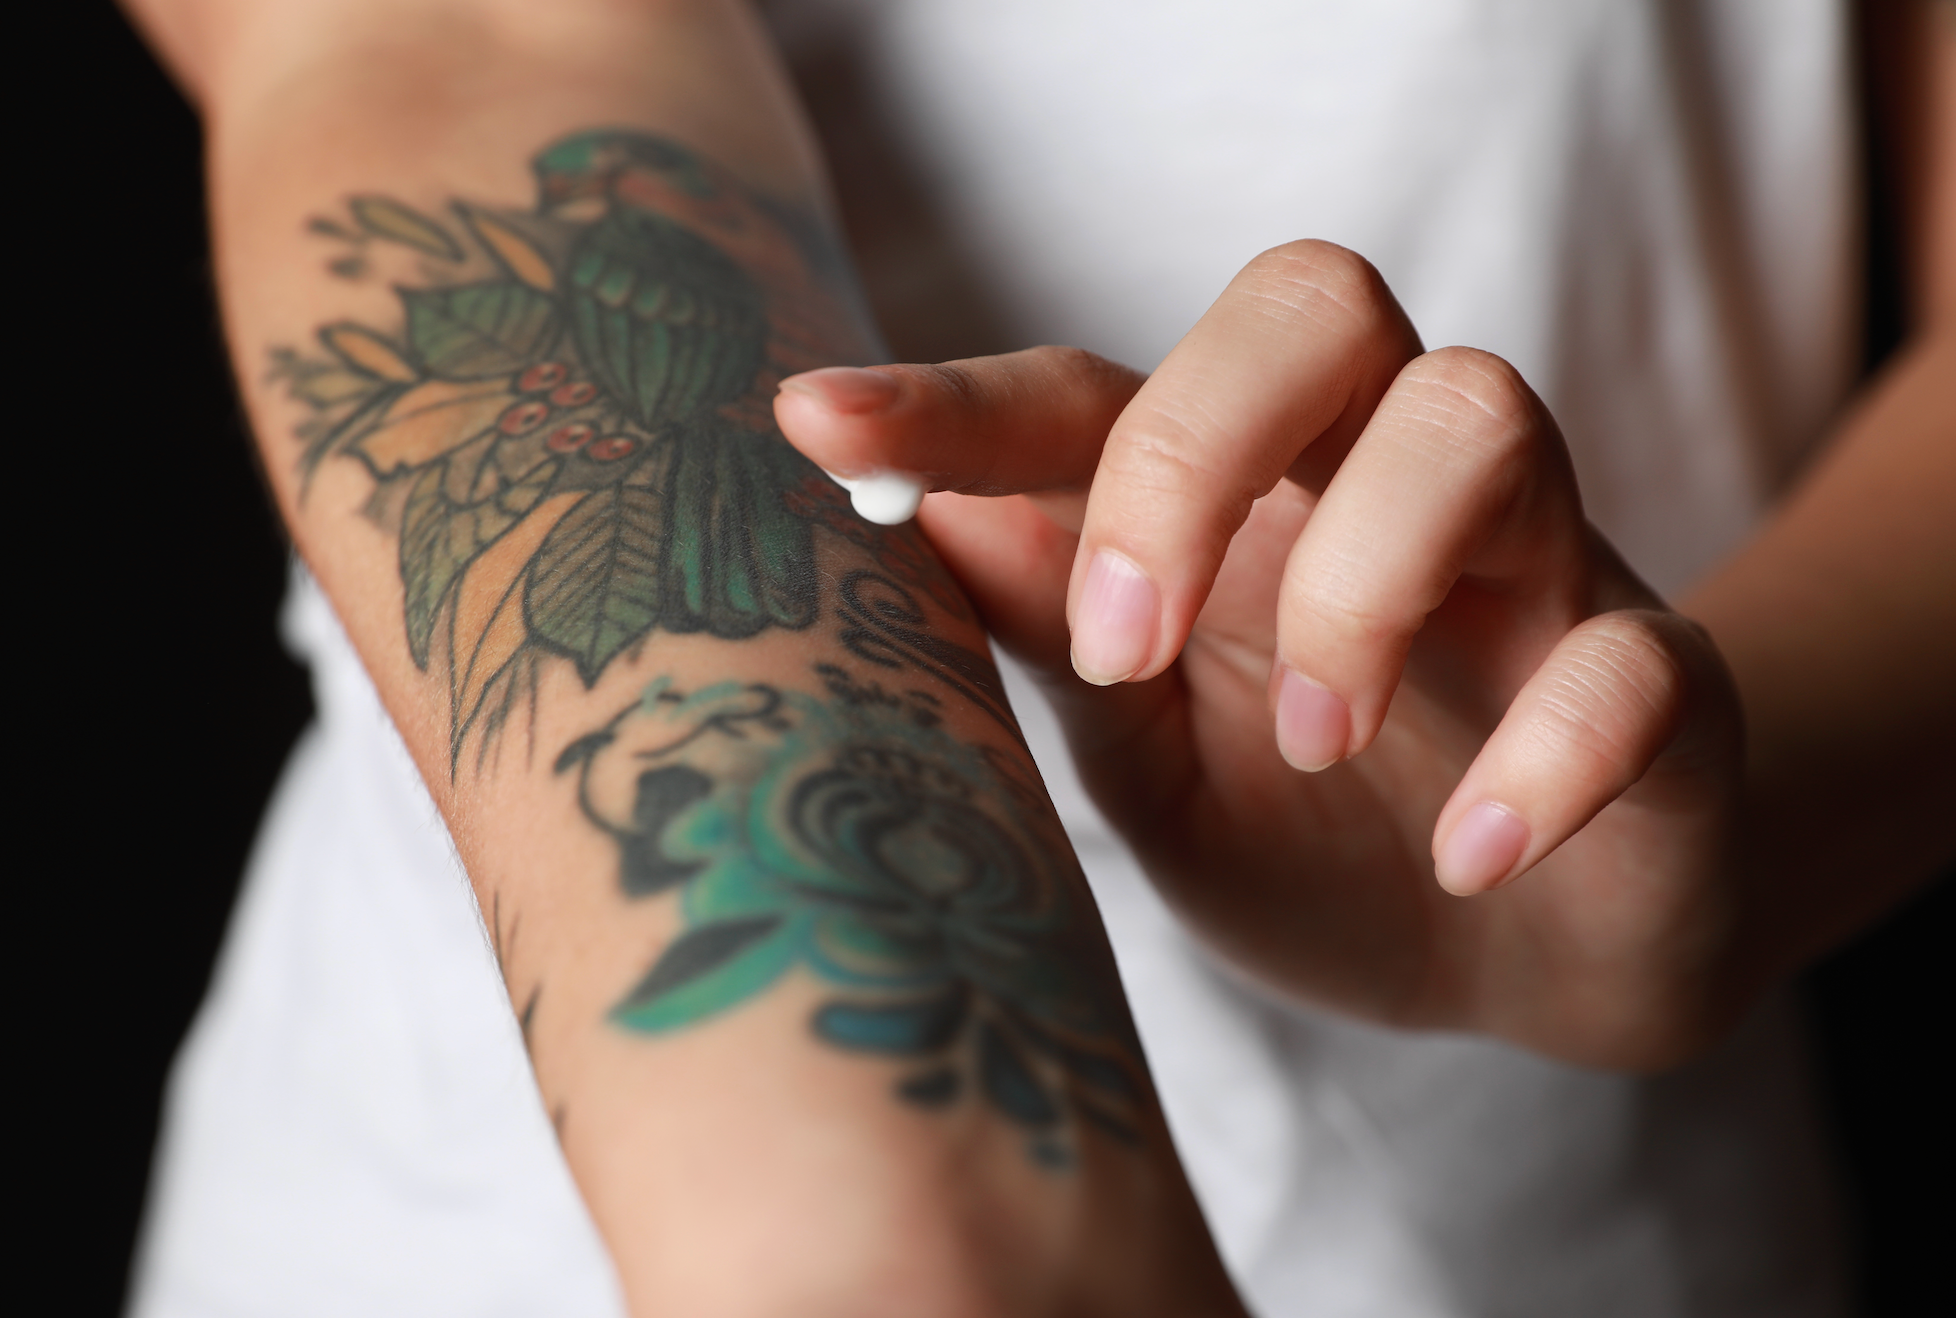 Guide To Tattoo Aftercare: Taking Care of Your New Tattoo